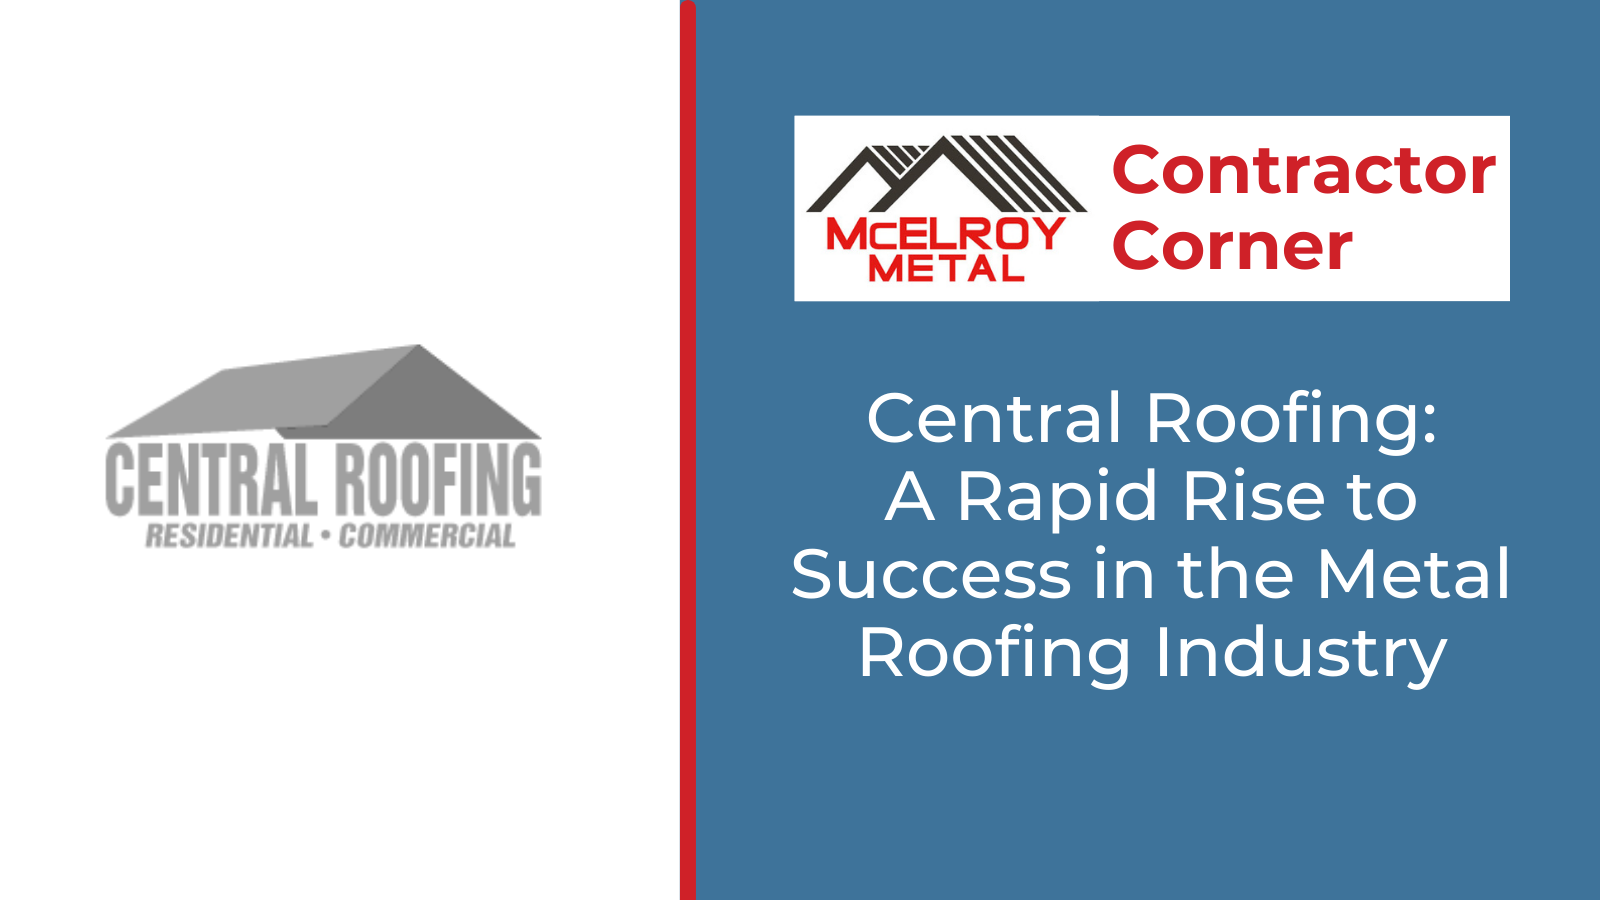 Central Roofing: A Rapid Rise to Success in the Metal Roofing Industry